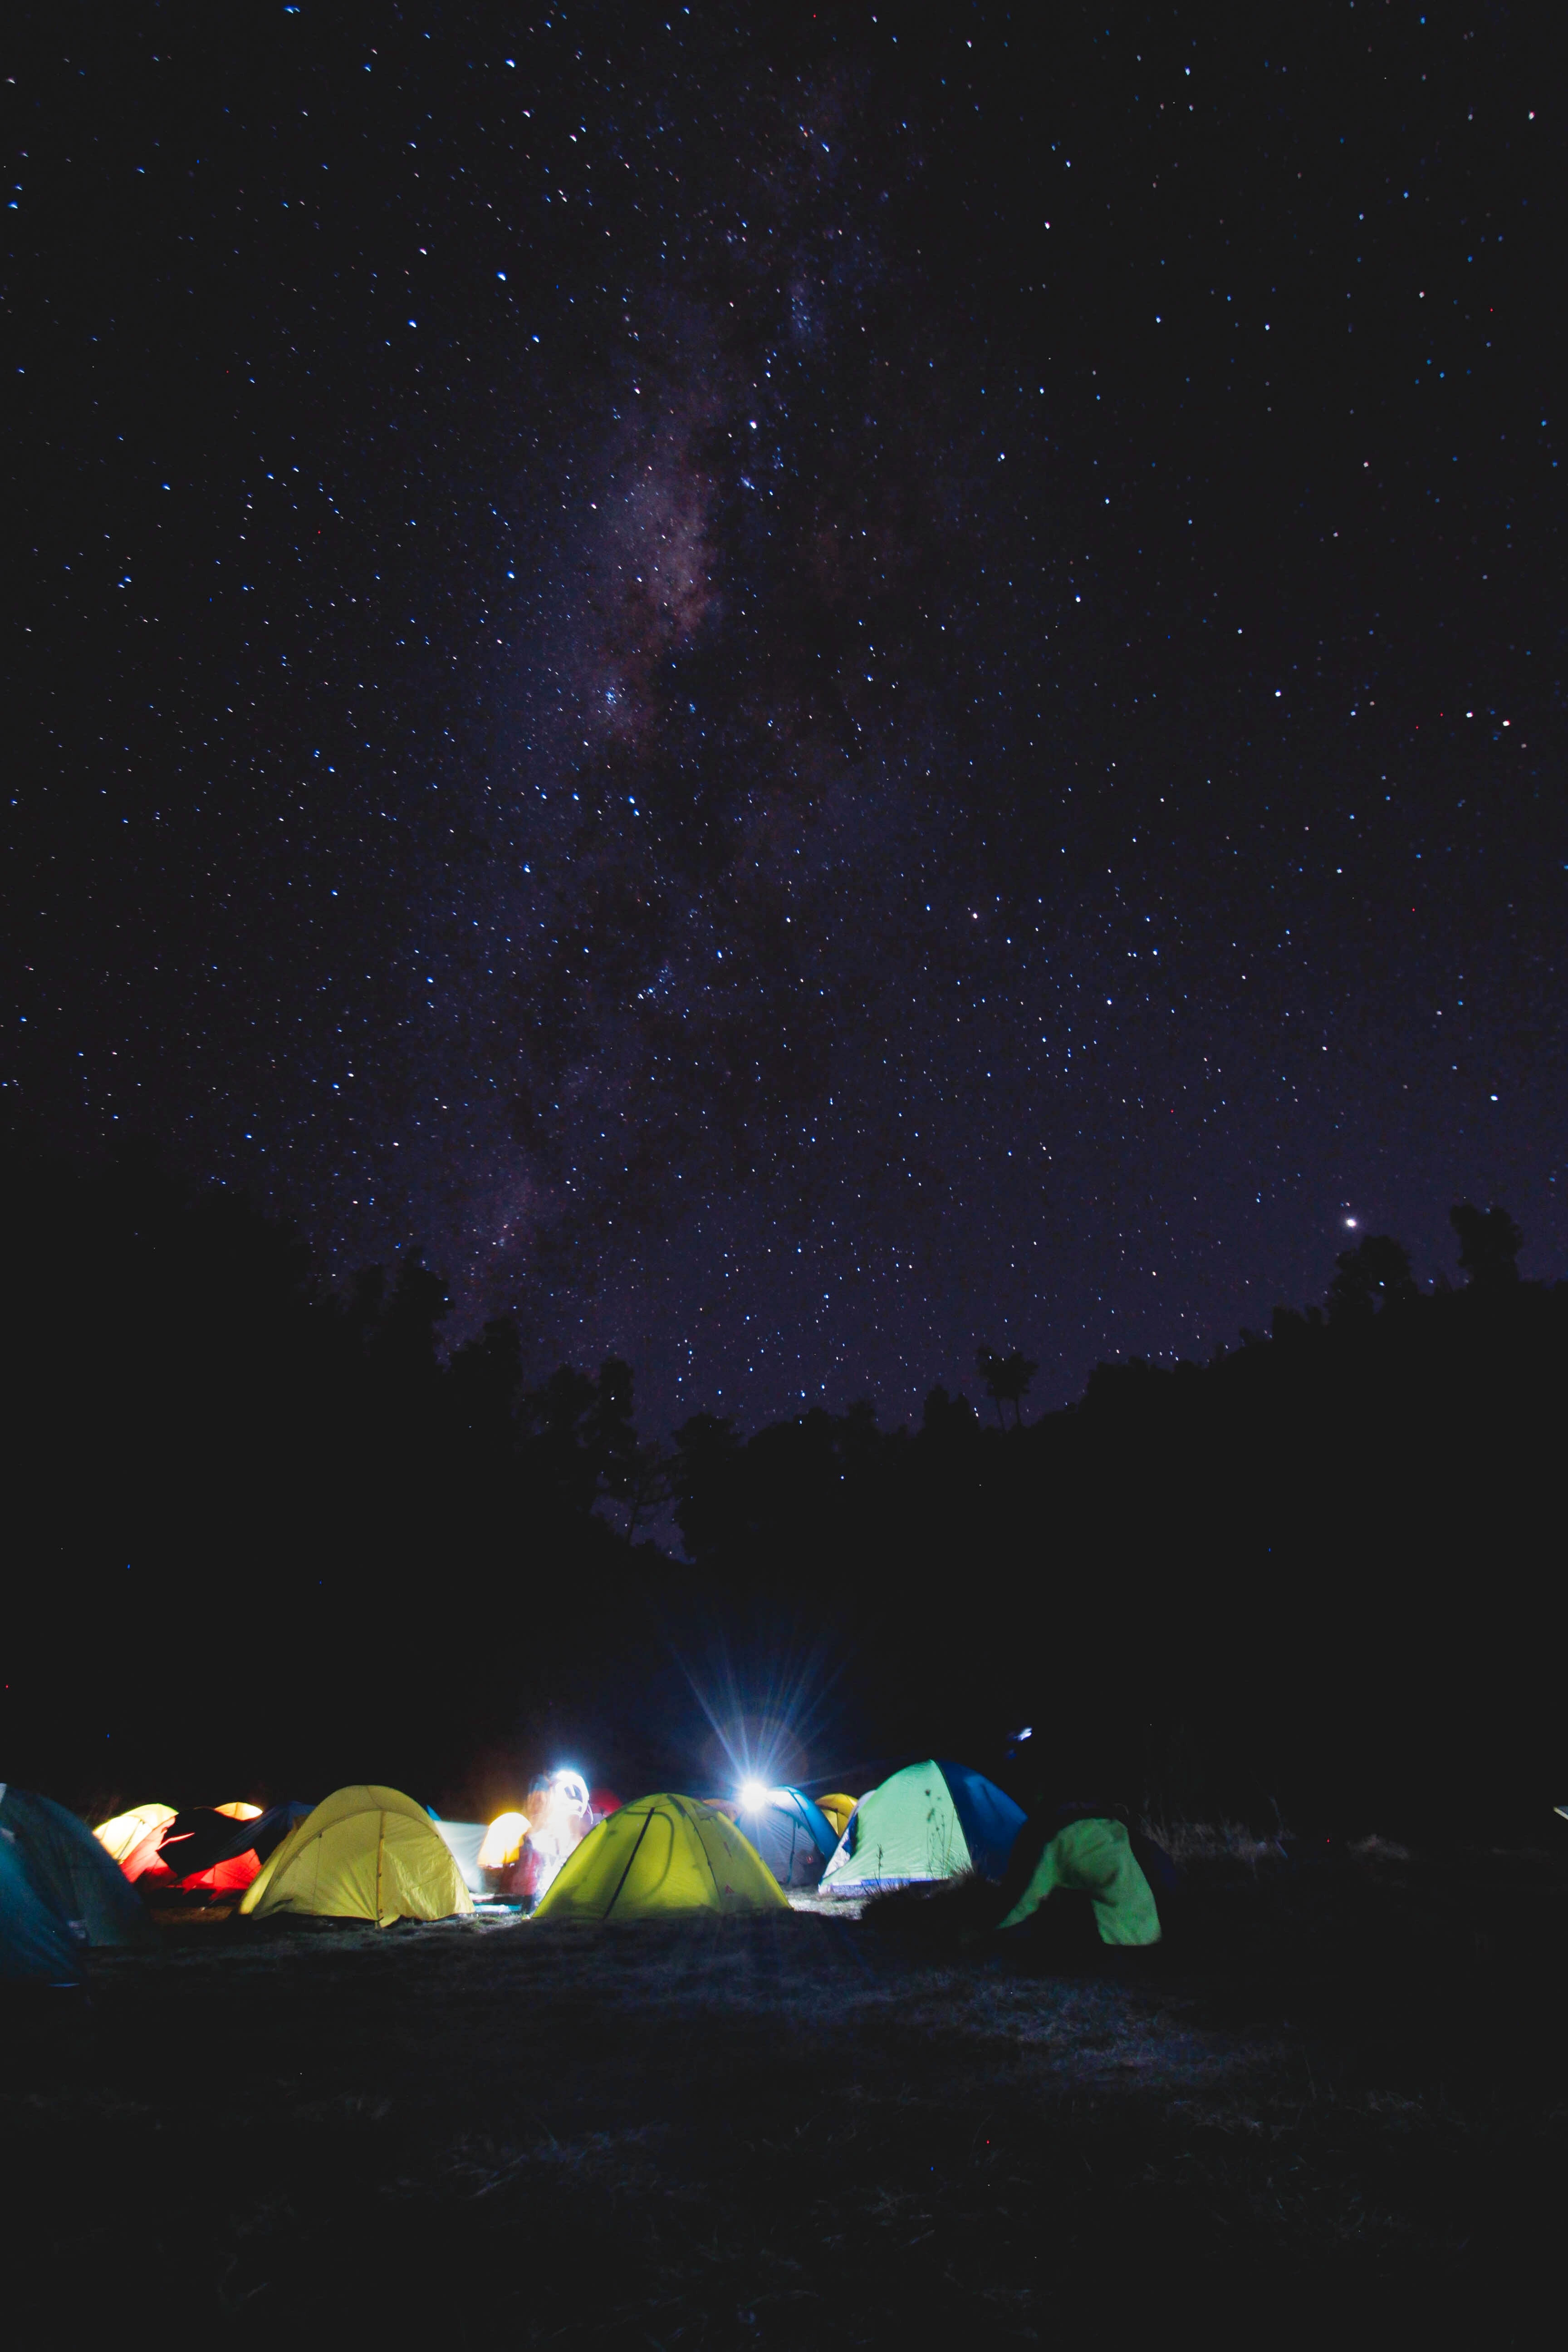 campsite, nature, night, starry sky, tent, camping, tents Image for desktop